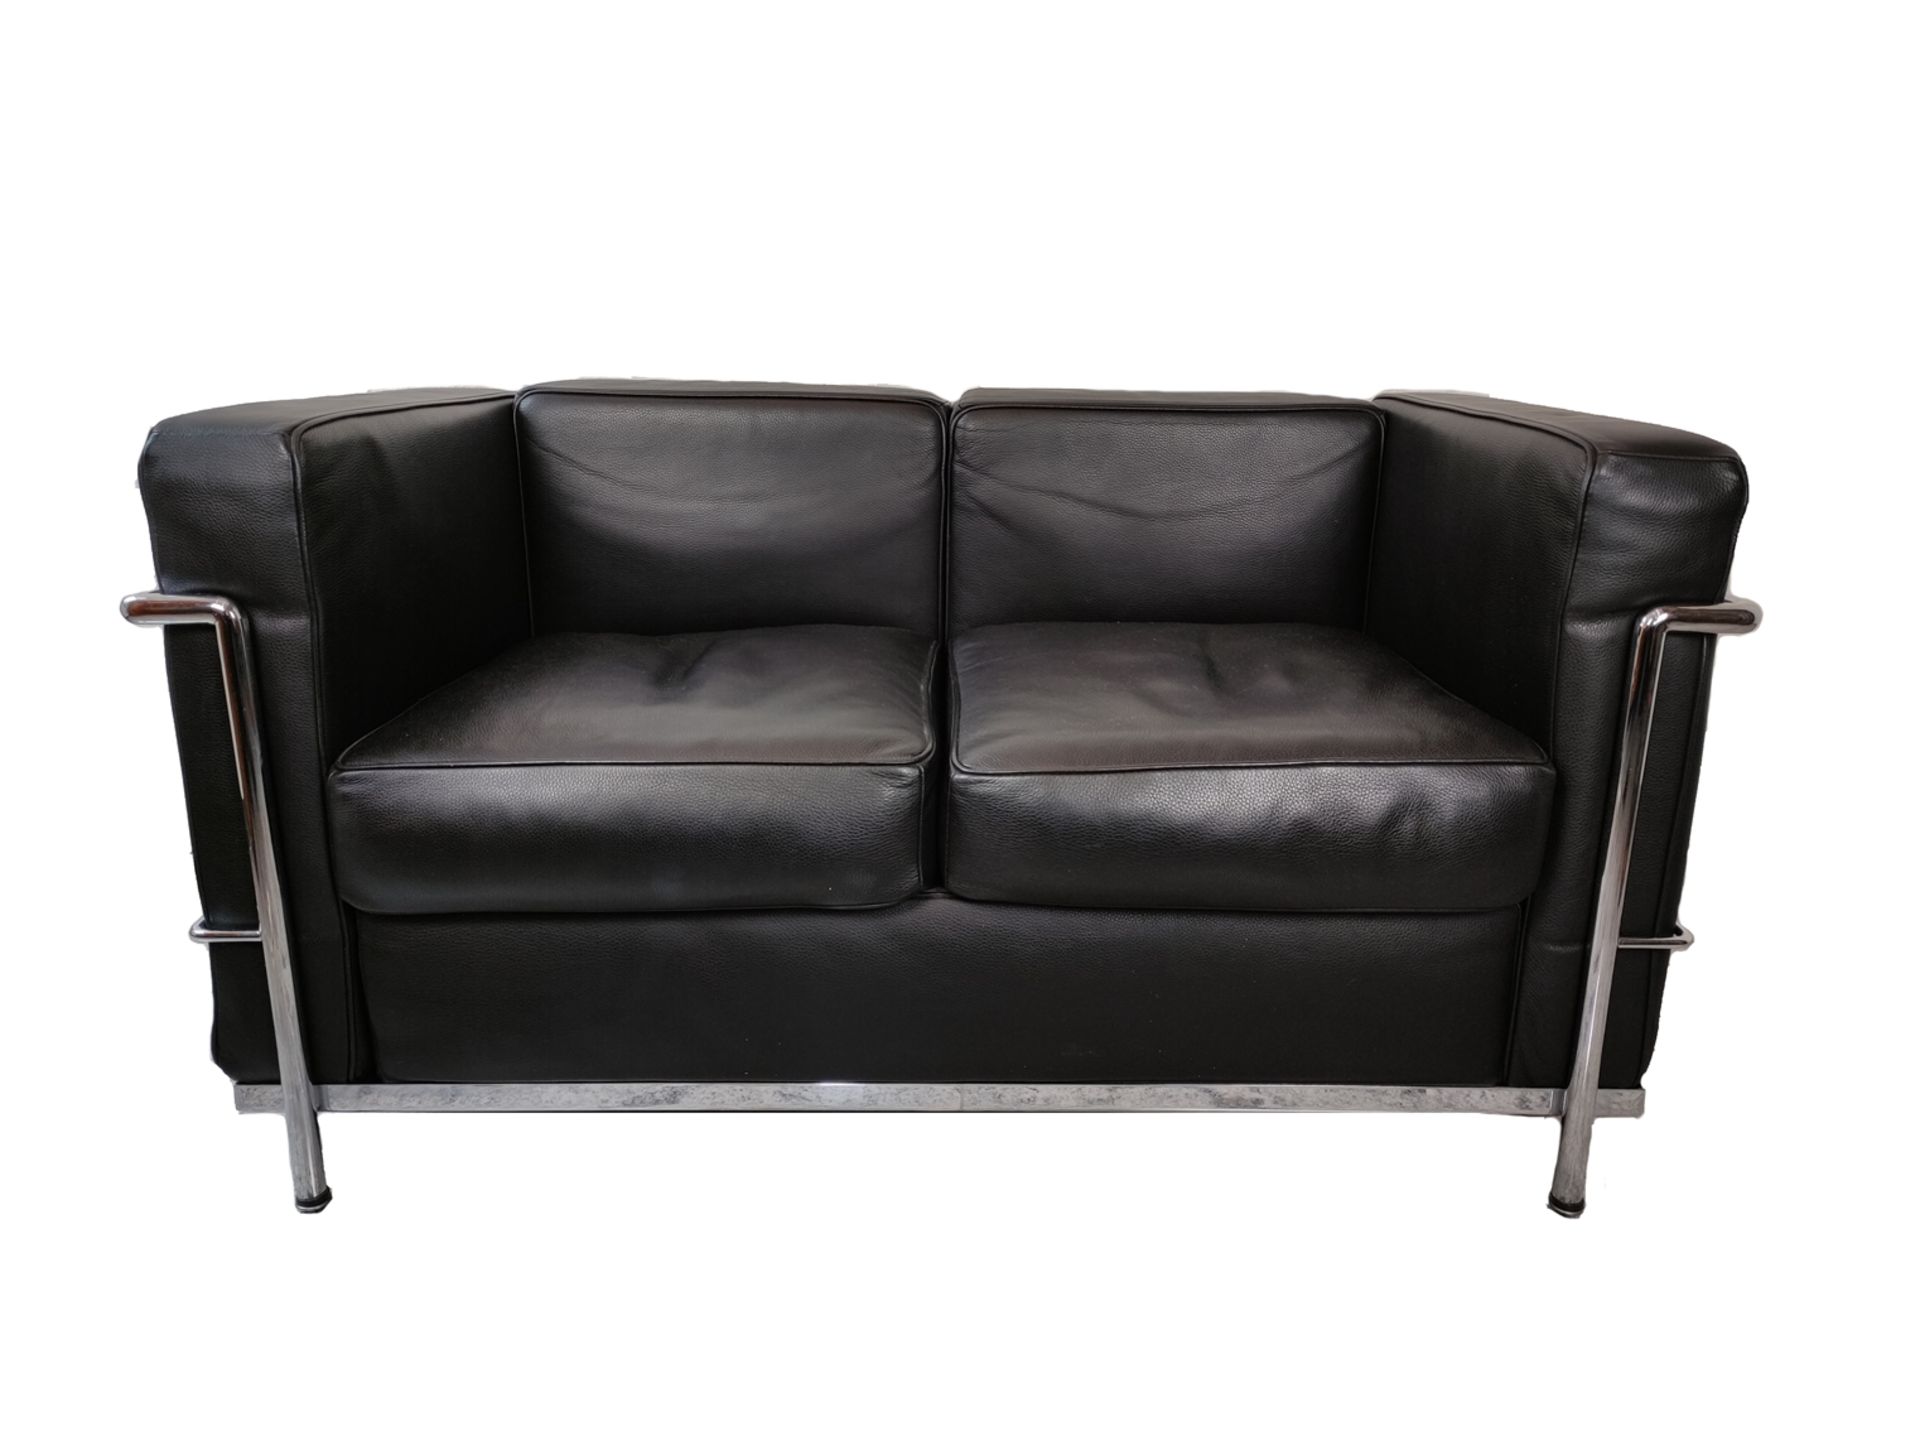 Design two-seater, sofa, after Le Corbusier, chrome frame, black leather cushions, 55x130x70cm, in 